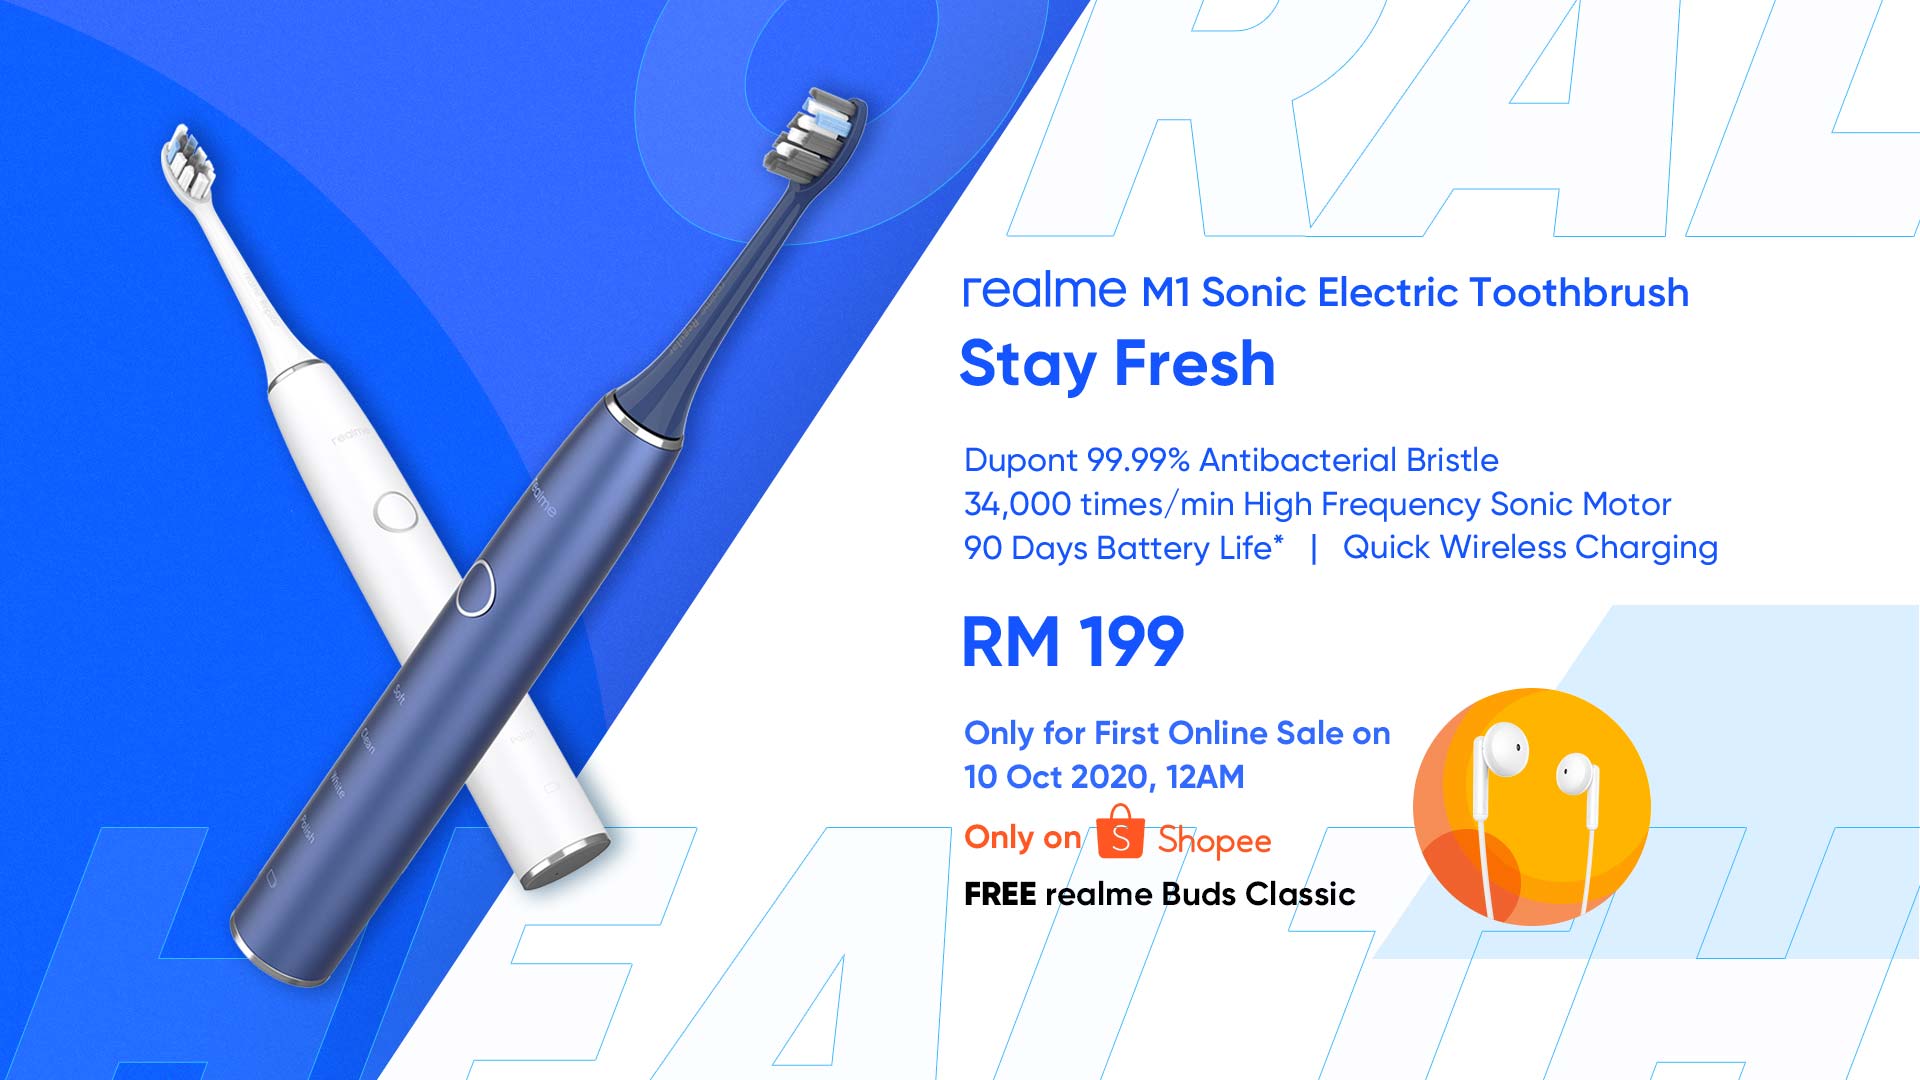 Visual realme M1 Sonic Electric Toothbrush